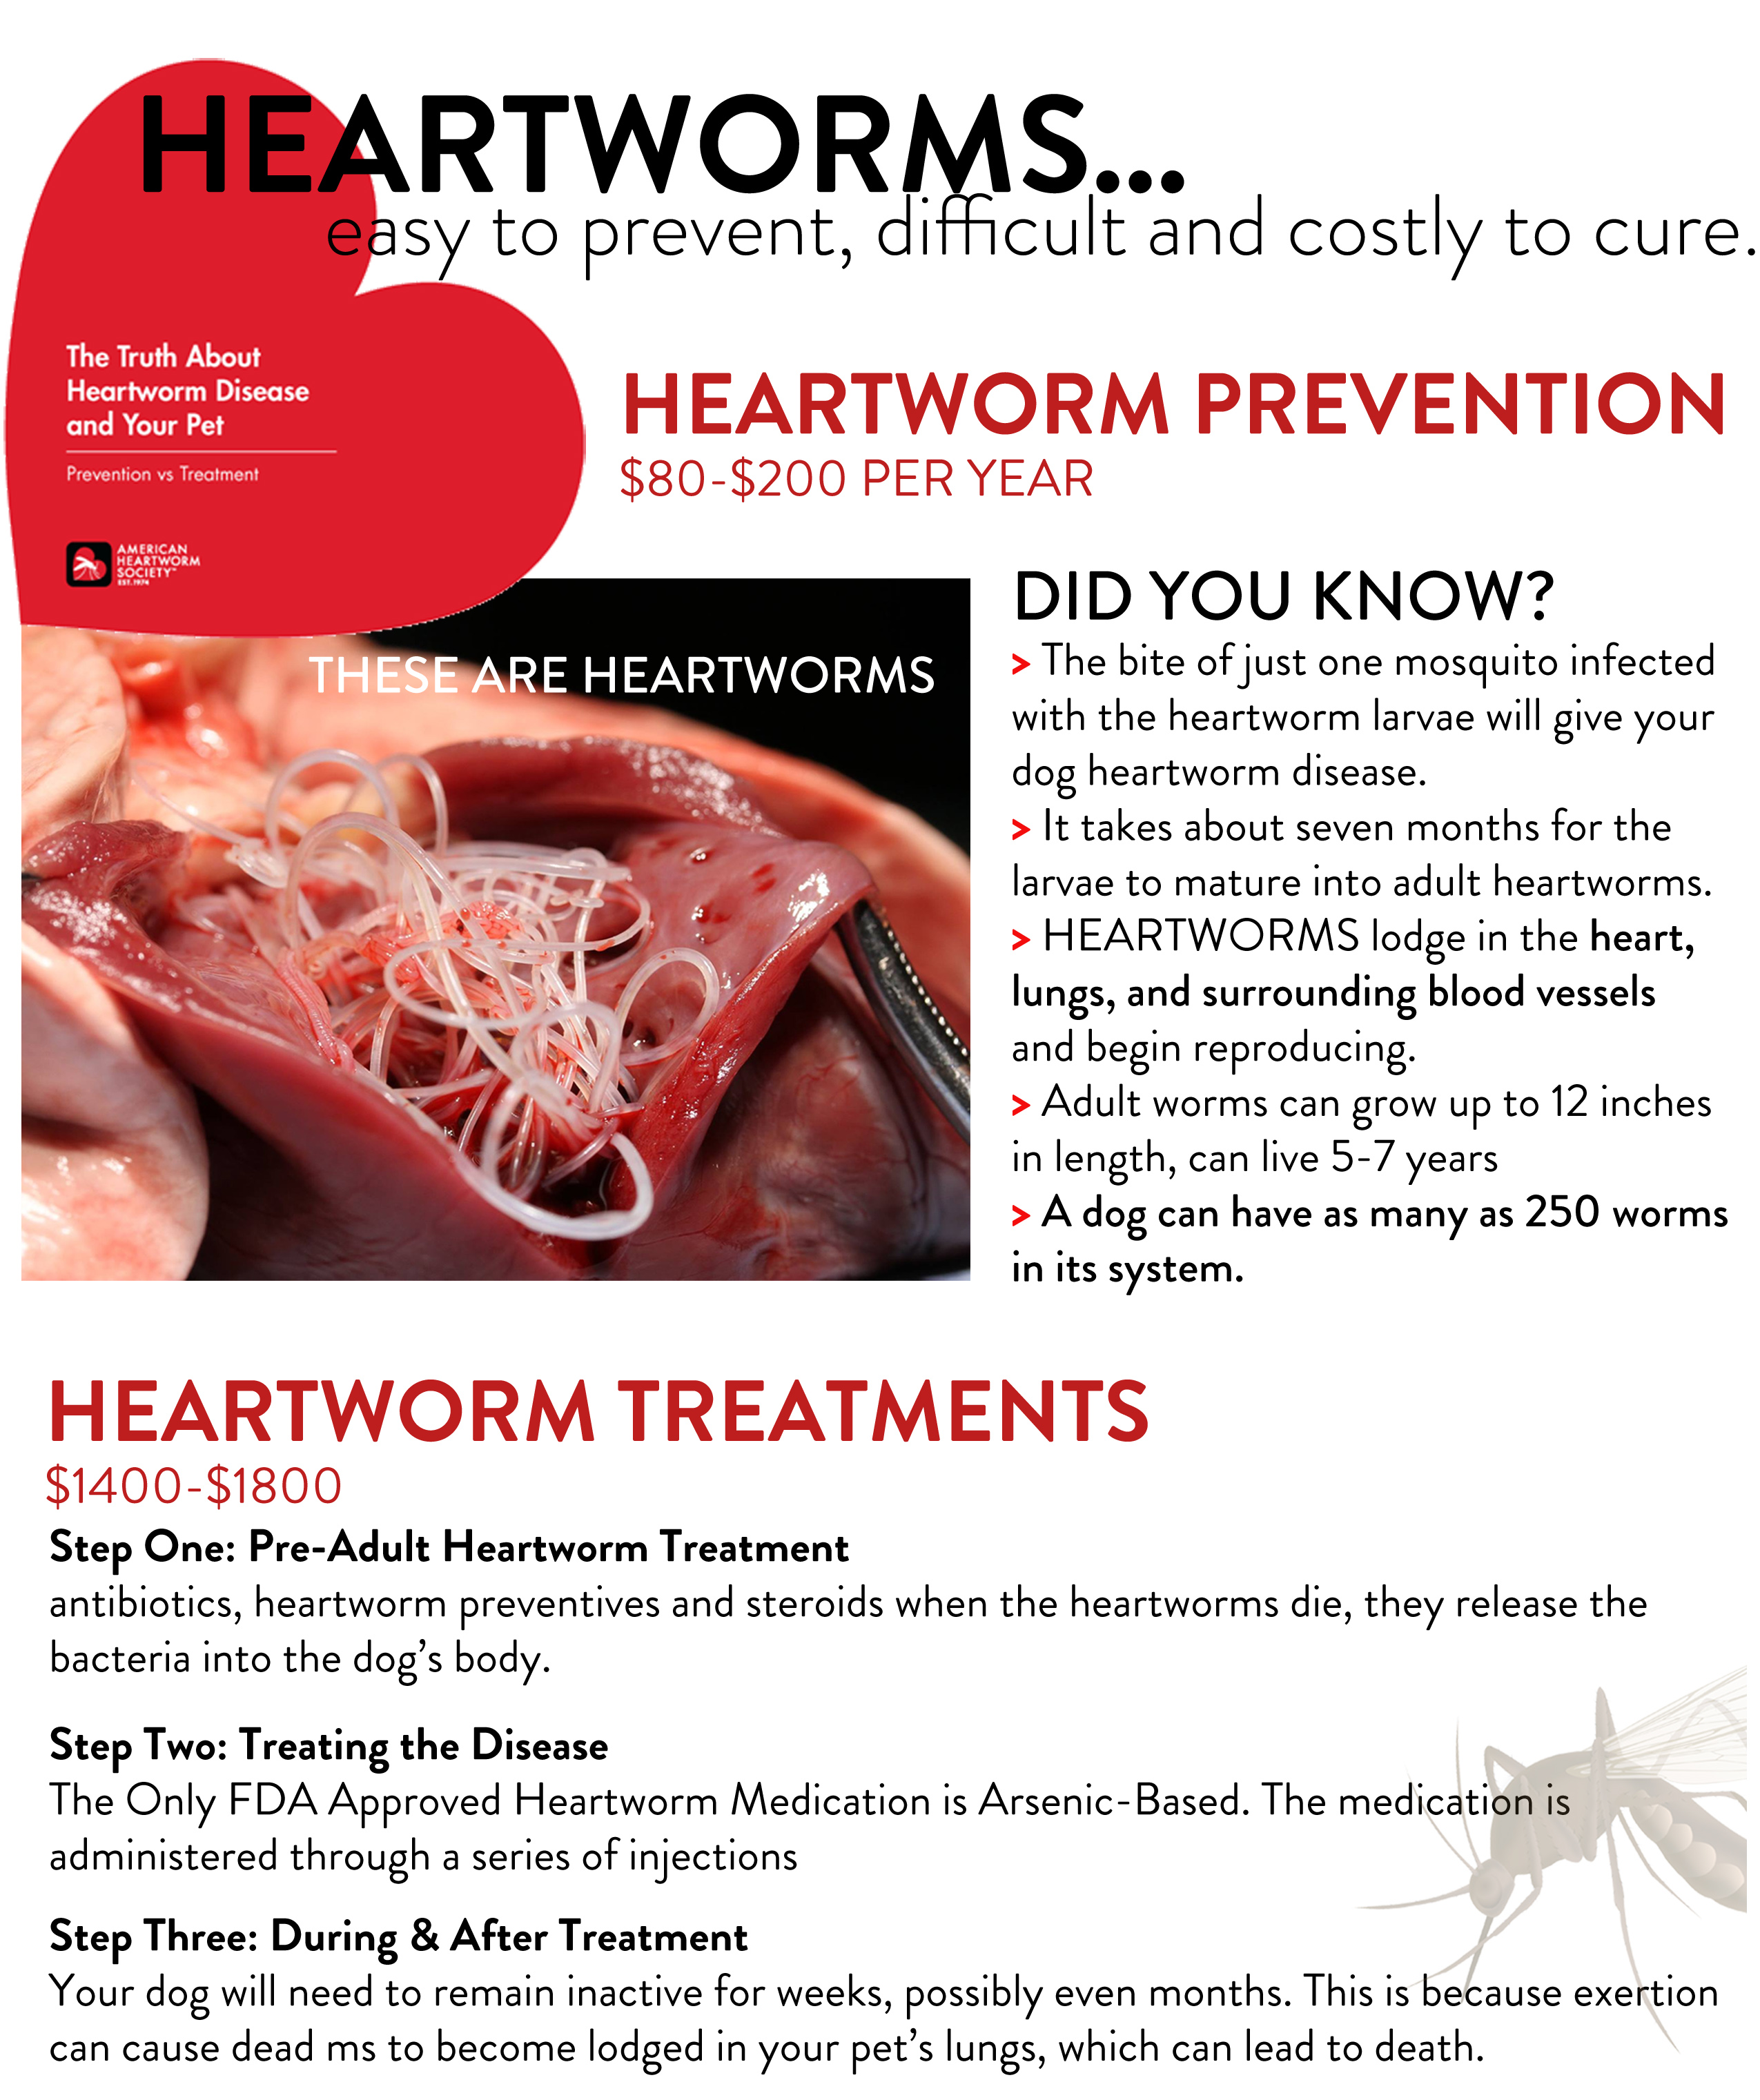 how-to-care-for-dog-after-heartworm-treatment